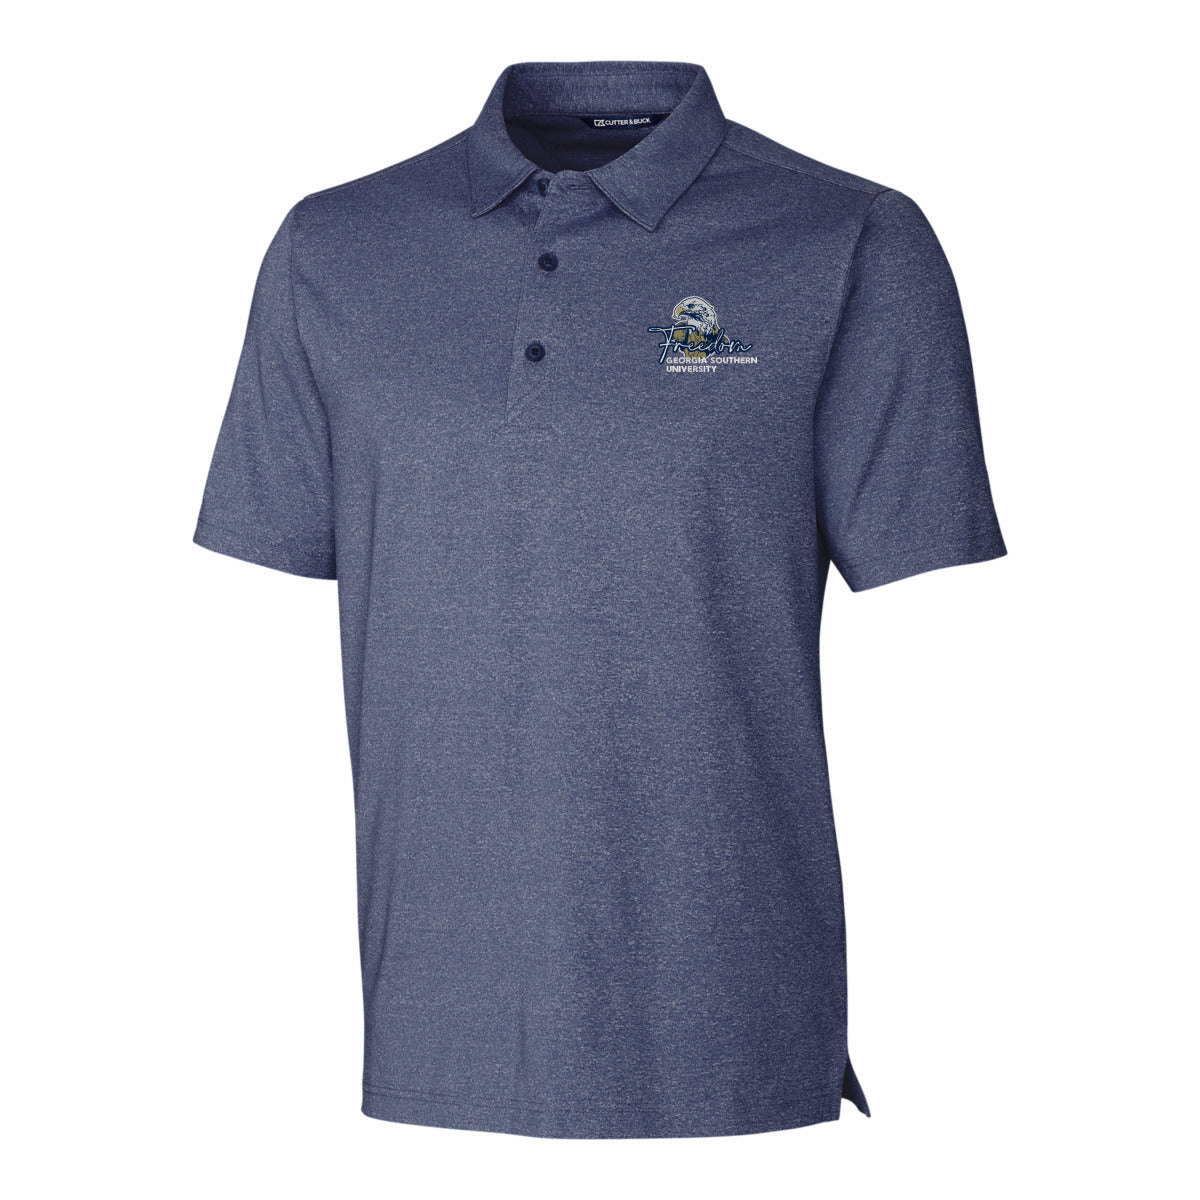 THE FREEDOM PROGRAM by CUTTER & BUCK - Heather Stretch Polo